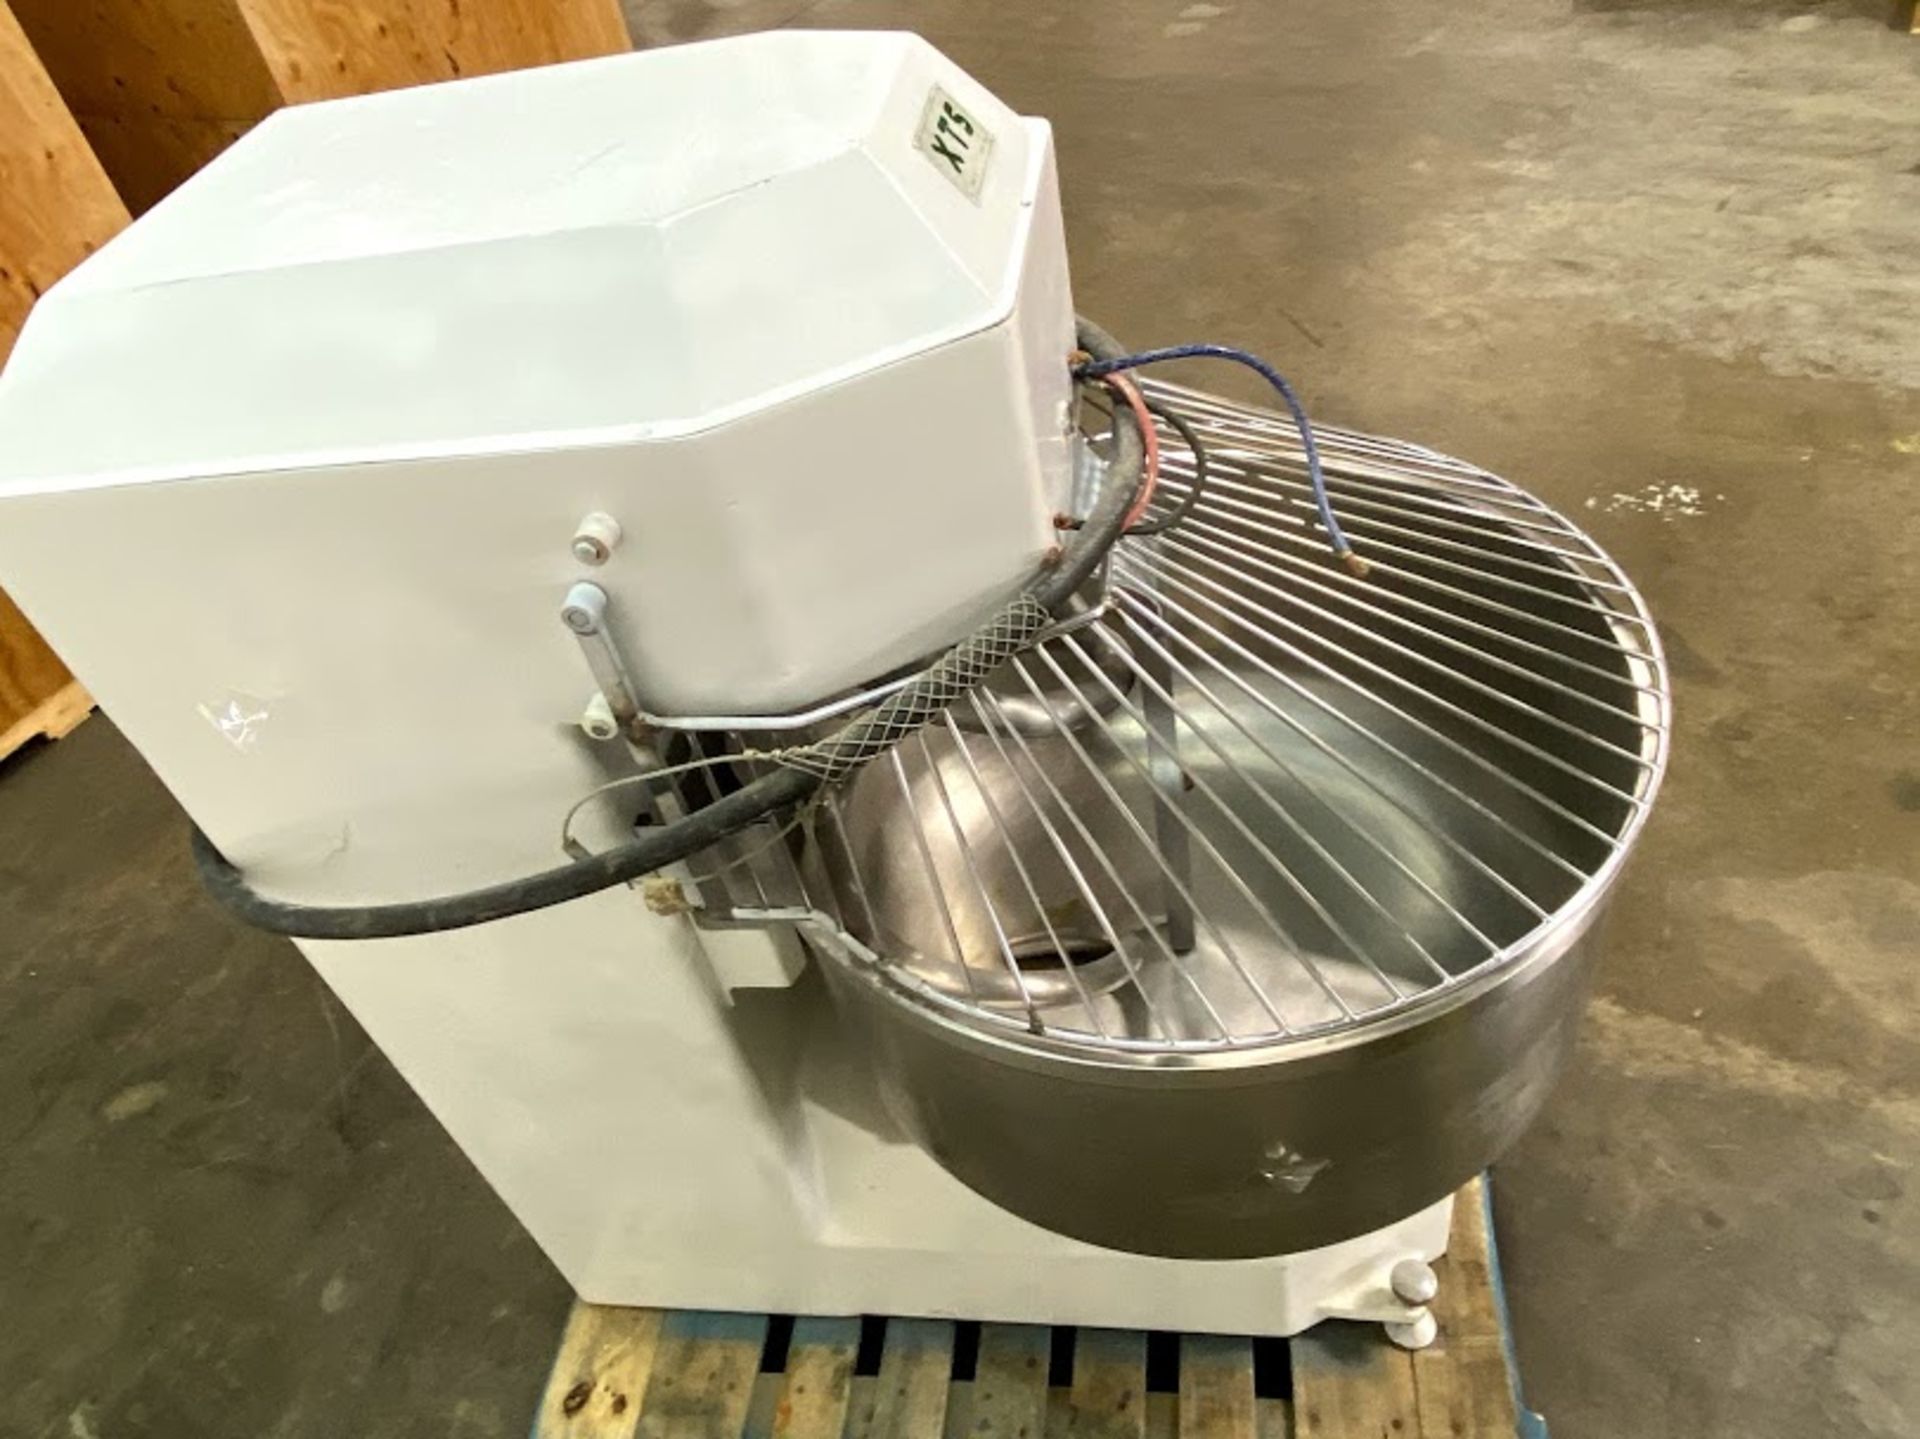 Consignment Lot: Lot Located in Abbotsford, BC - Nicholson XTS 180 Spiral Mixer - Image 2 of 8